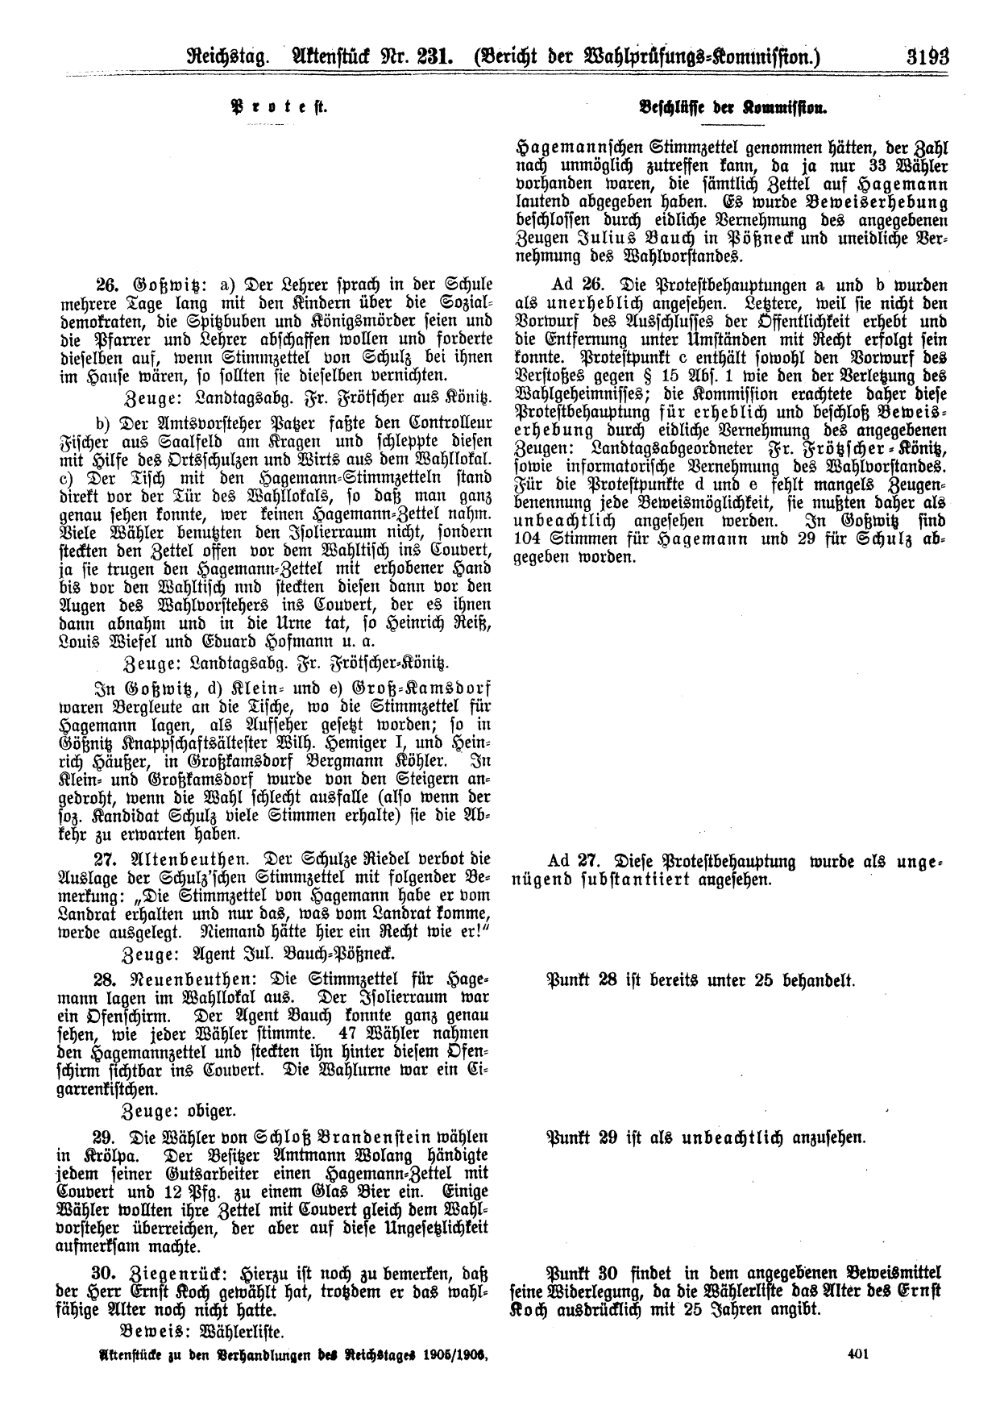 Scan of page 3193